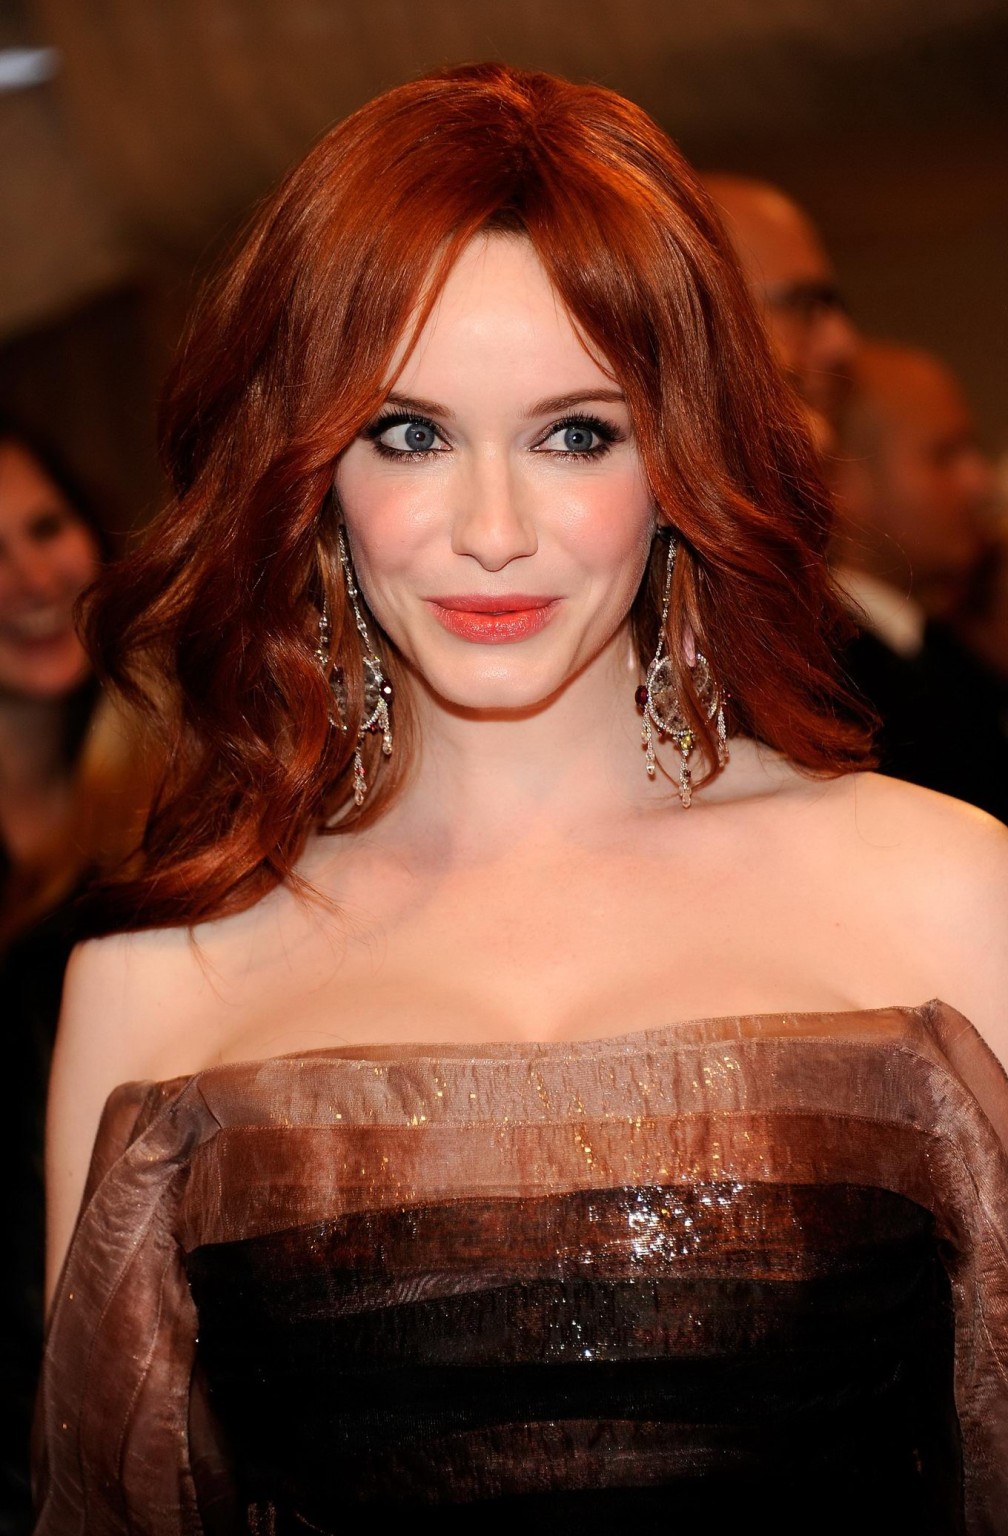 Christina Hendricks busty wearing low cut dress at the Benefit Gala in NYC #75305638